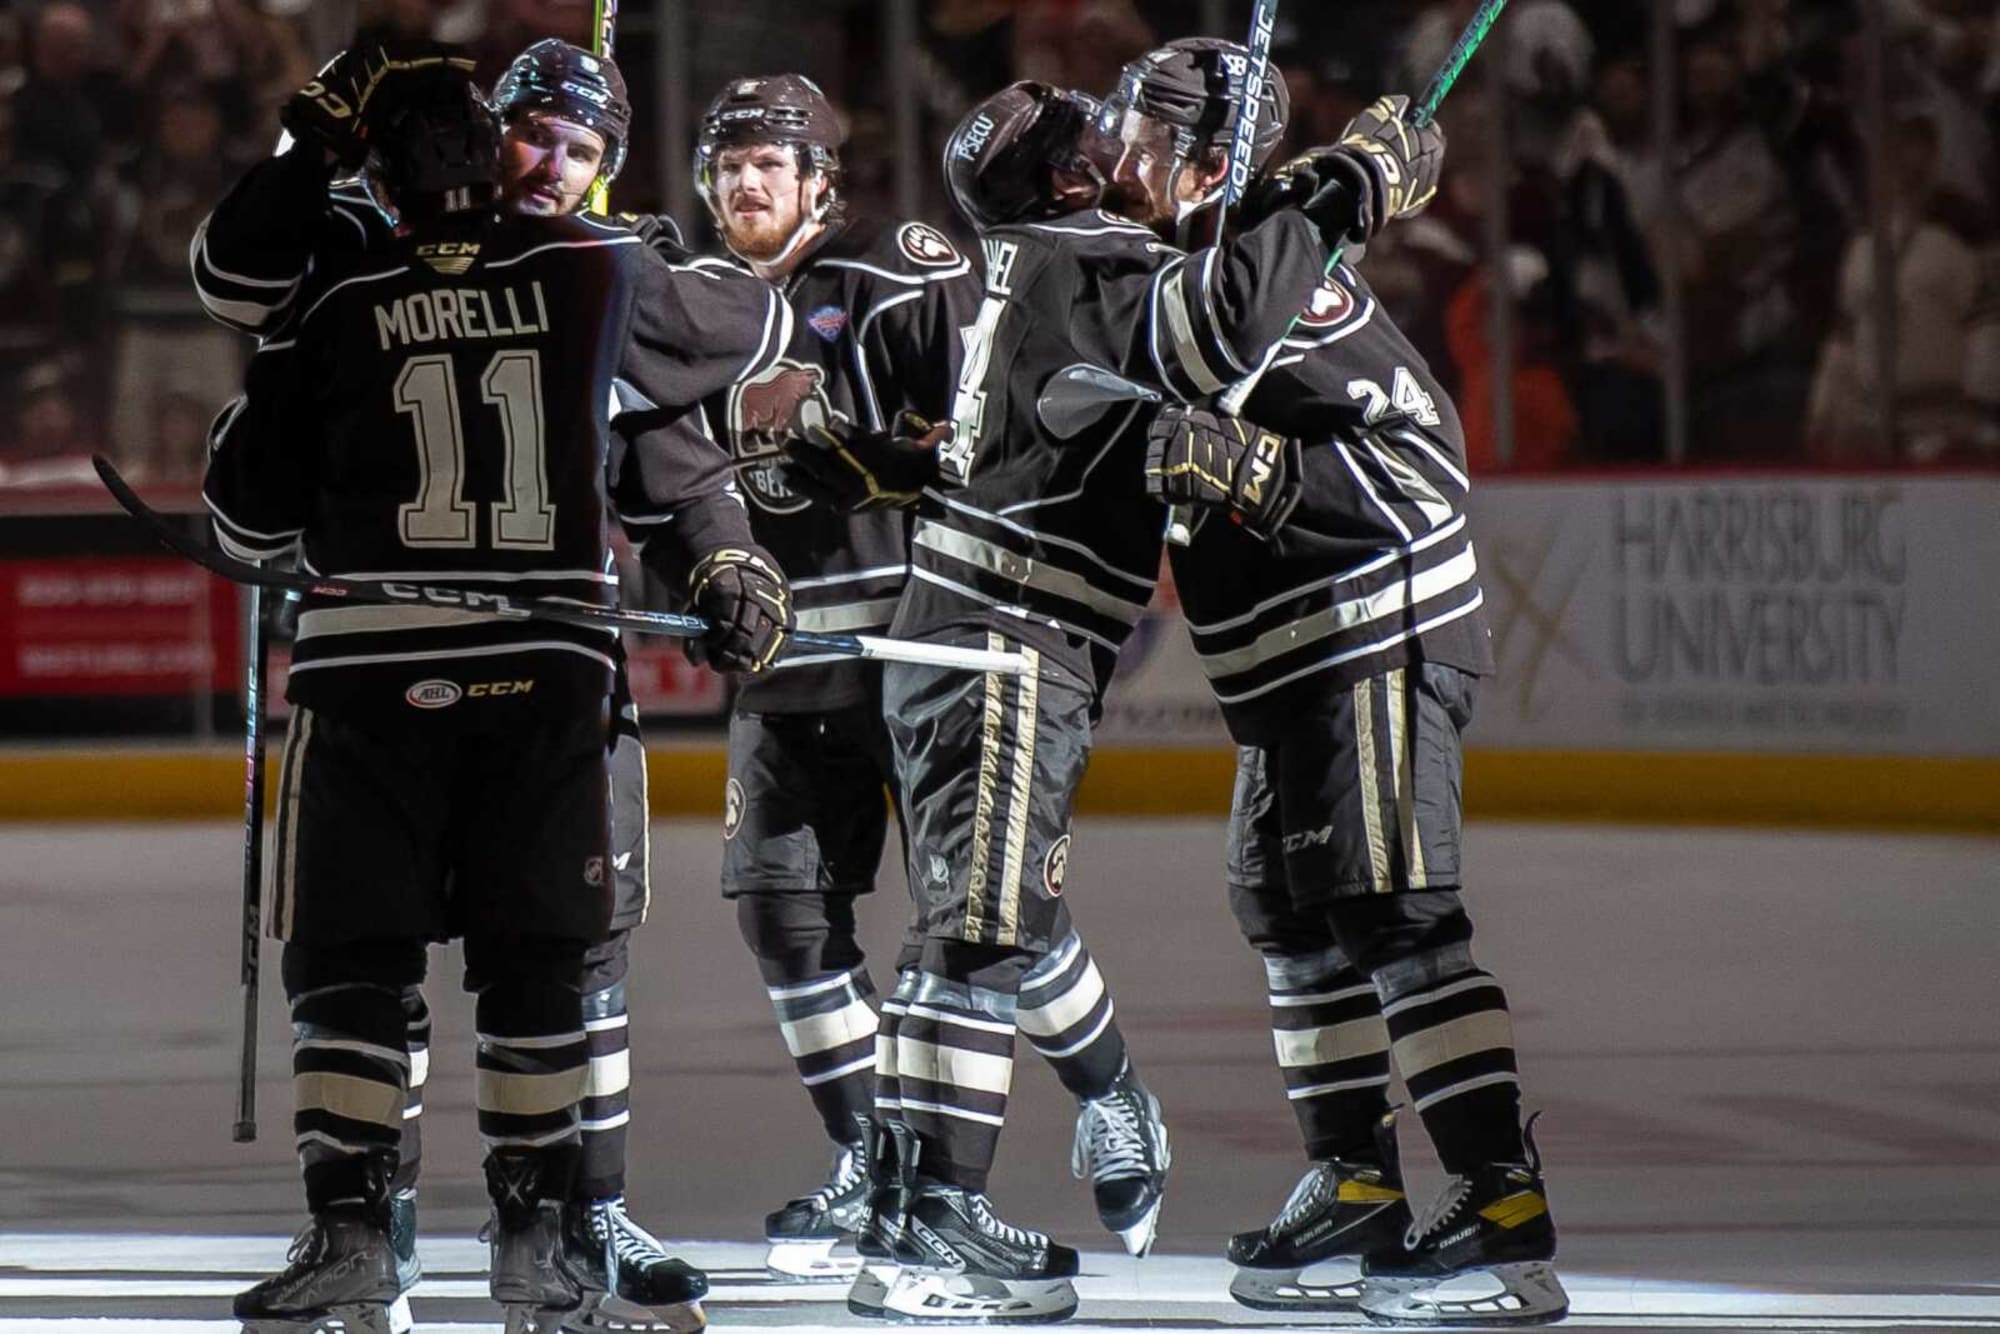 Bears take Game 3, look to even Calder Cup Finals tonight